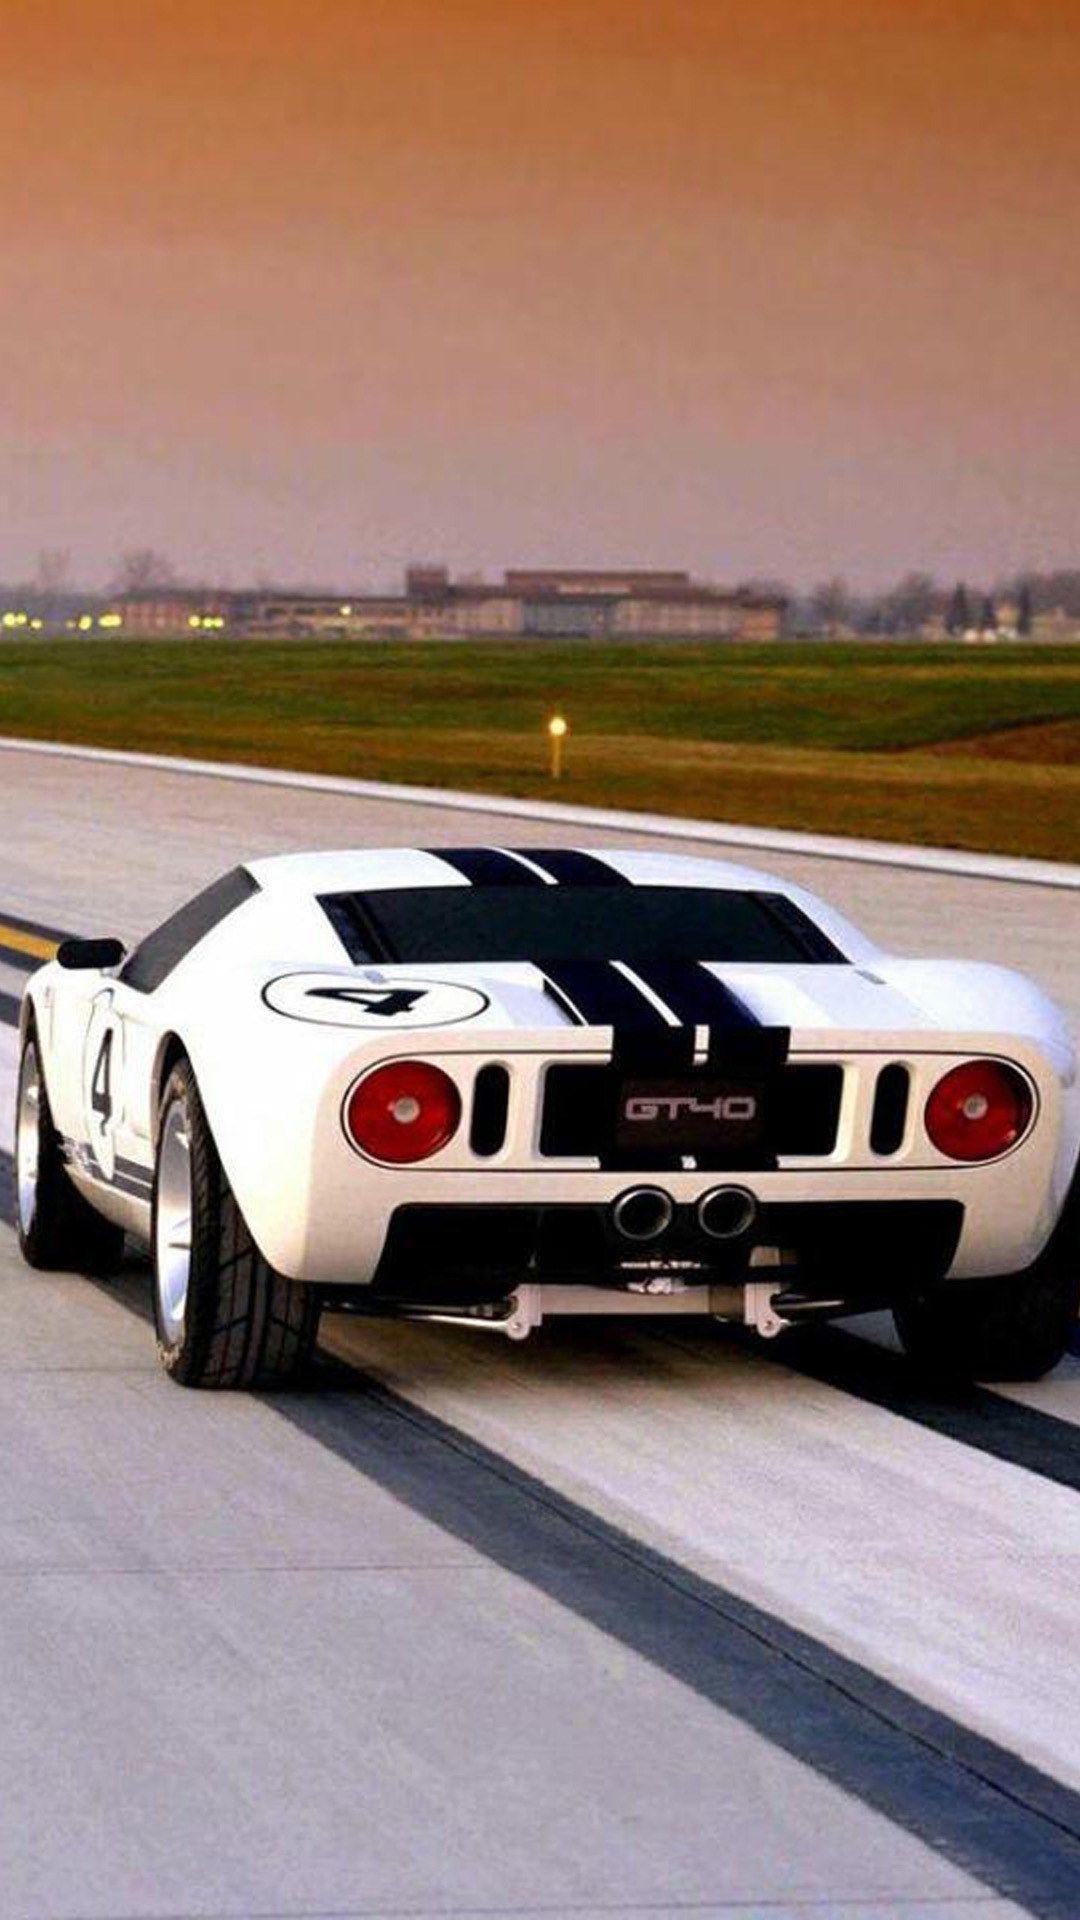 ford gt40 HD wallpaper iphone. Ford gt, Ford gt HD wallpaper